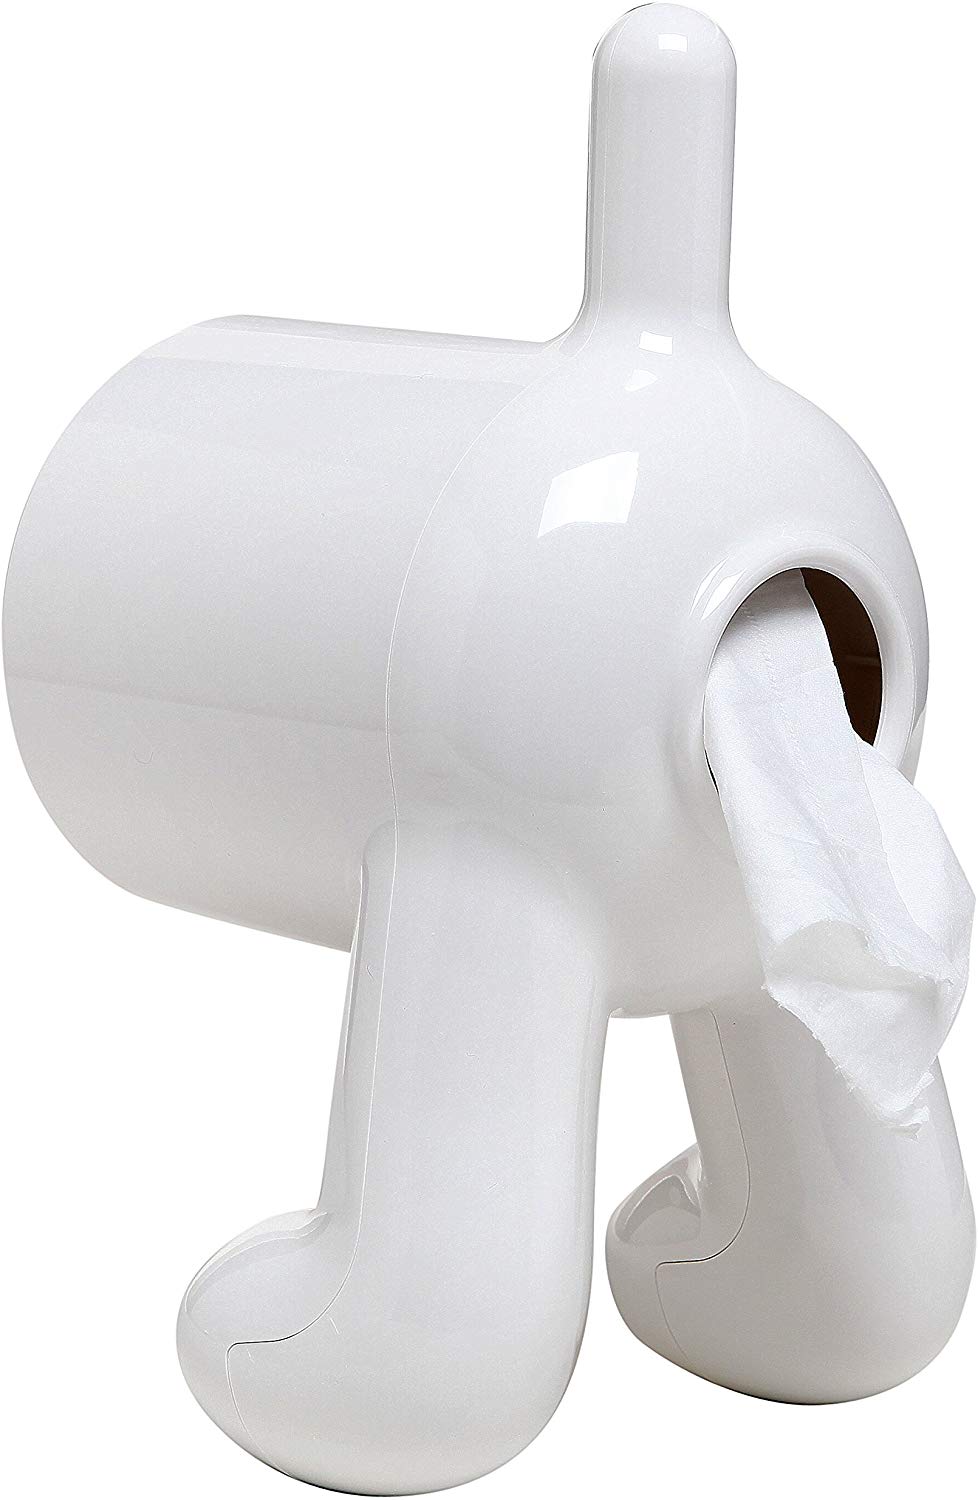 Funny White Dog's Rear End Wall Mounted Single Toilet Paper Roll Holder